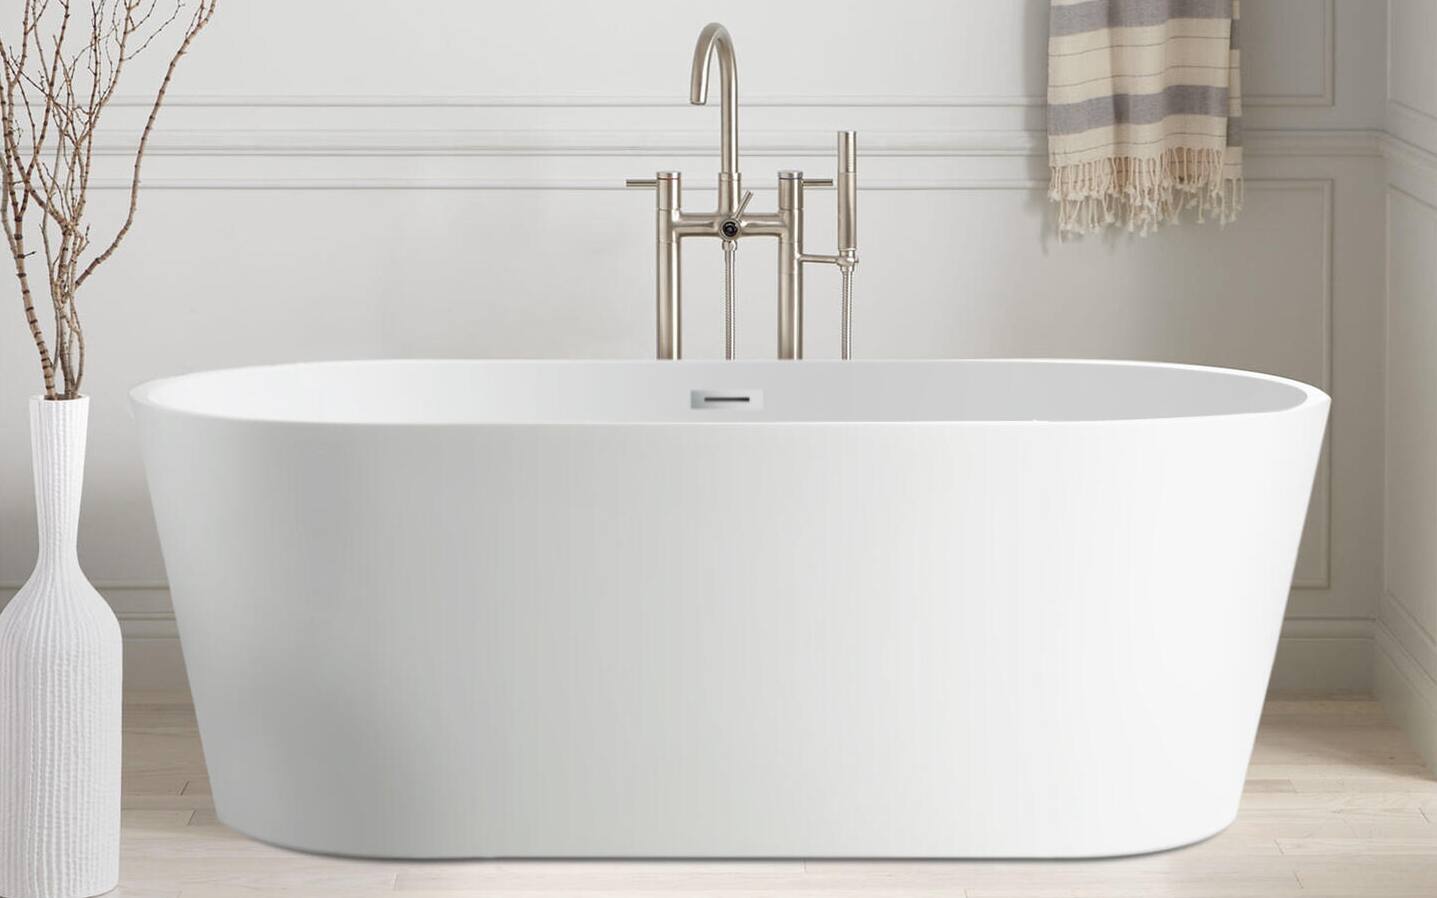 What Bathtub Accessories Should Be Purchased While Purchasing A